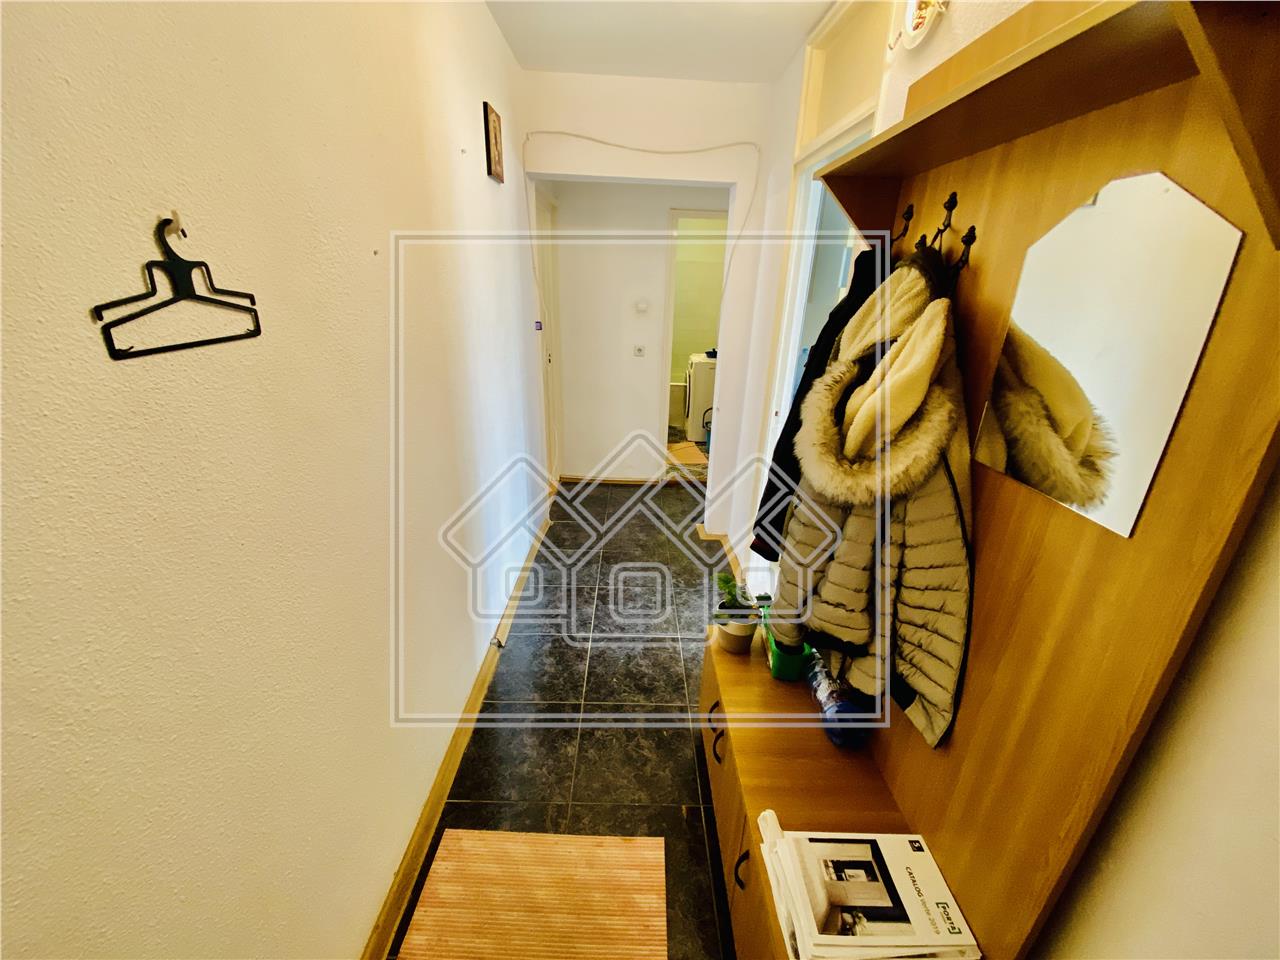 Apartment for sale in Sibiu - 2 rooms and balcony - Calea Dumbravii